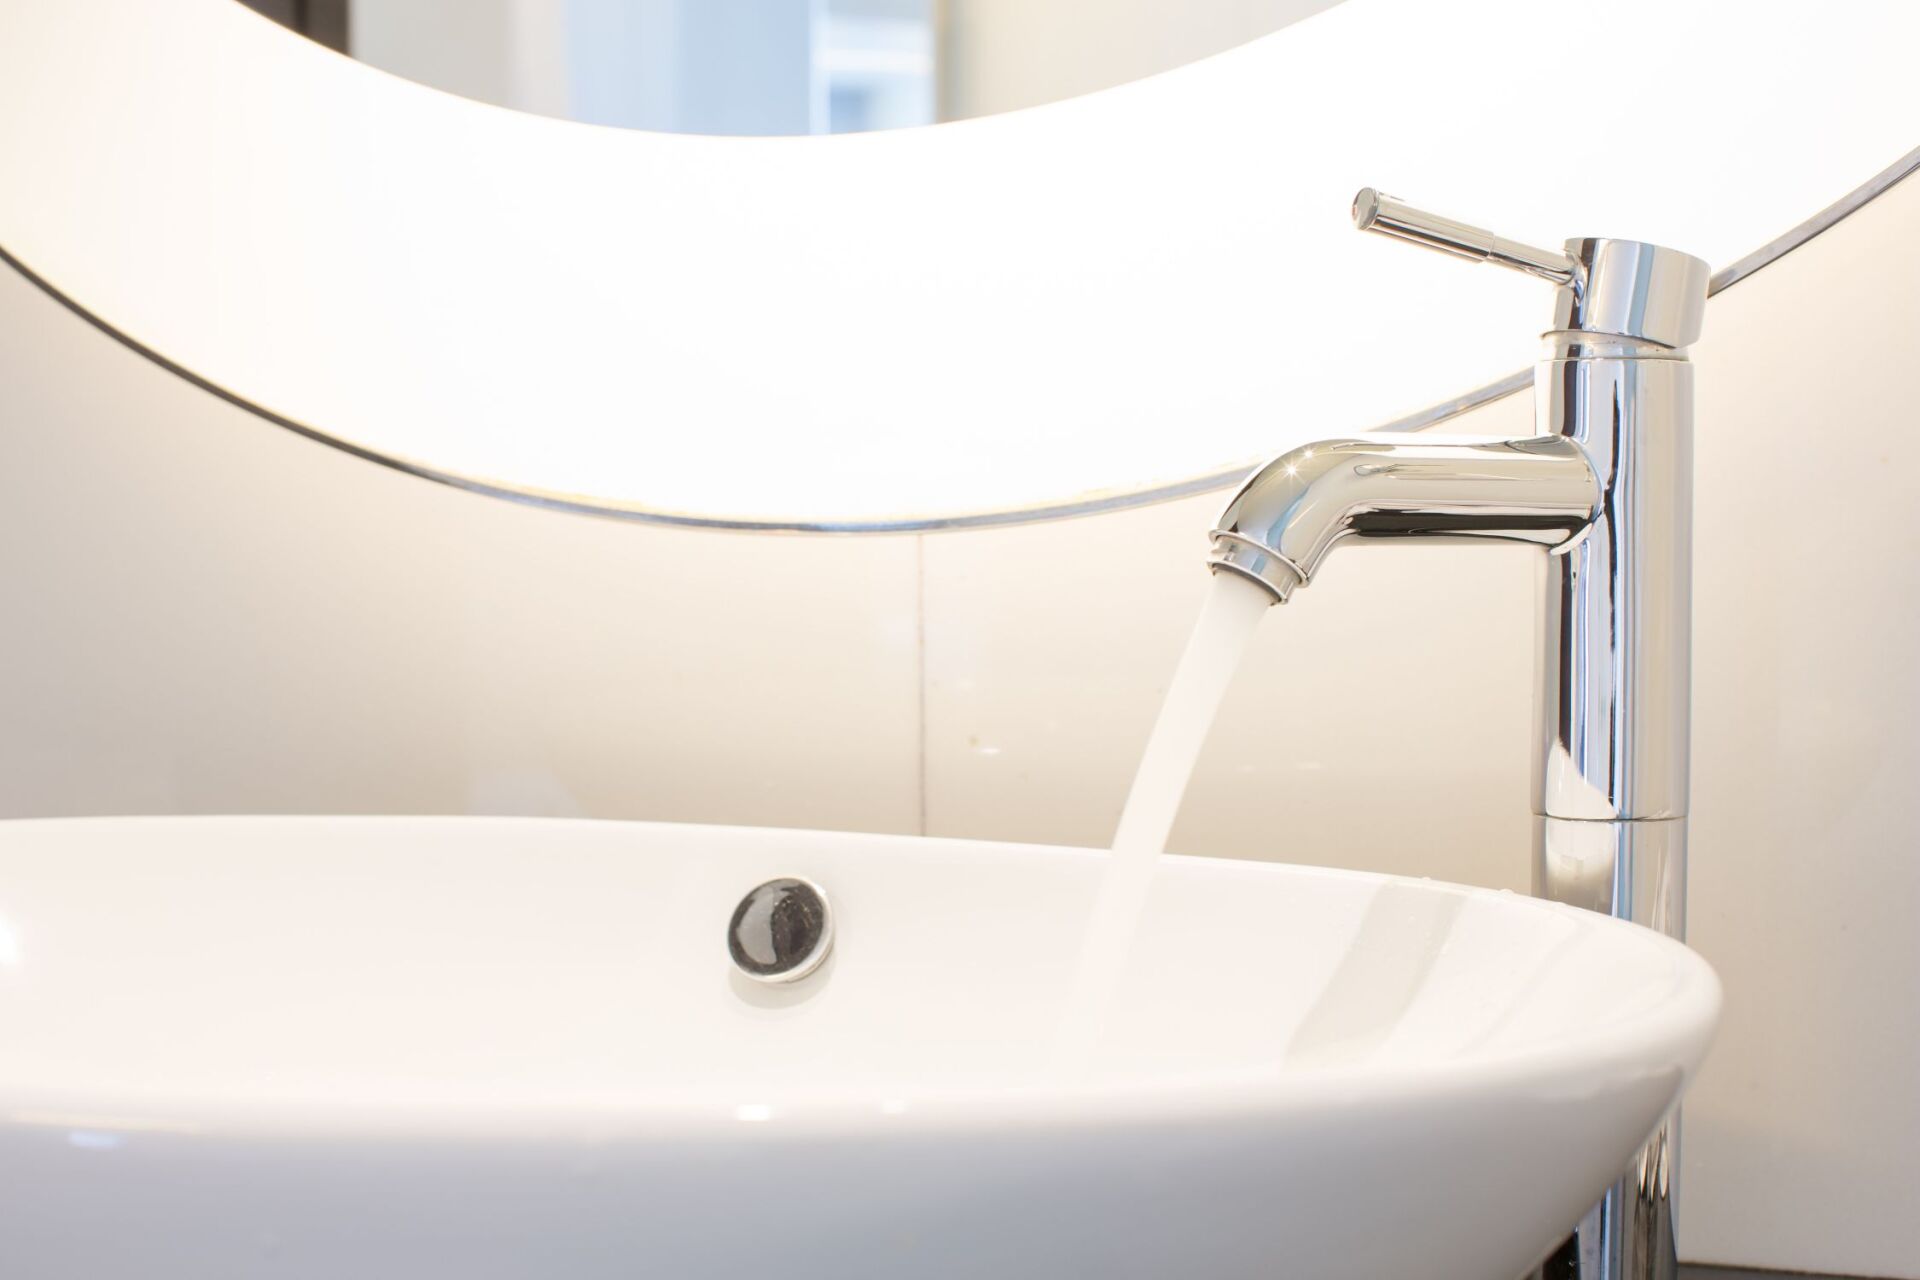 Bathroom Faucet— Plumbing & Gas fitting in Coffs Harbour